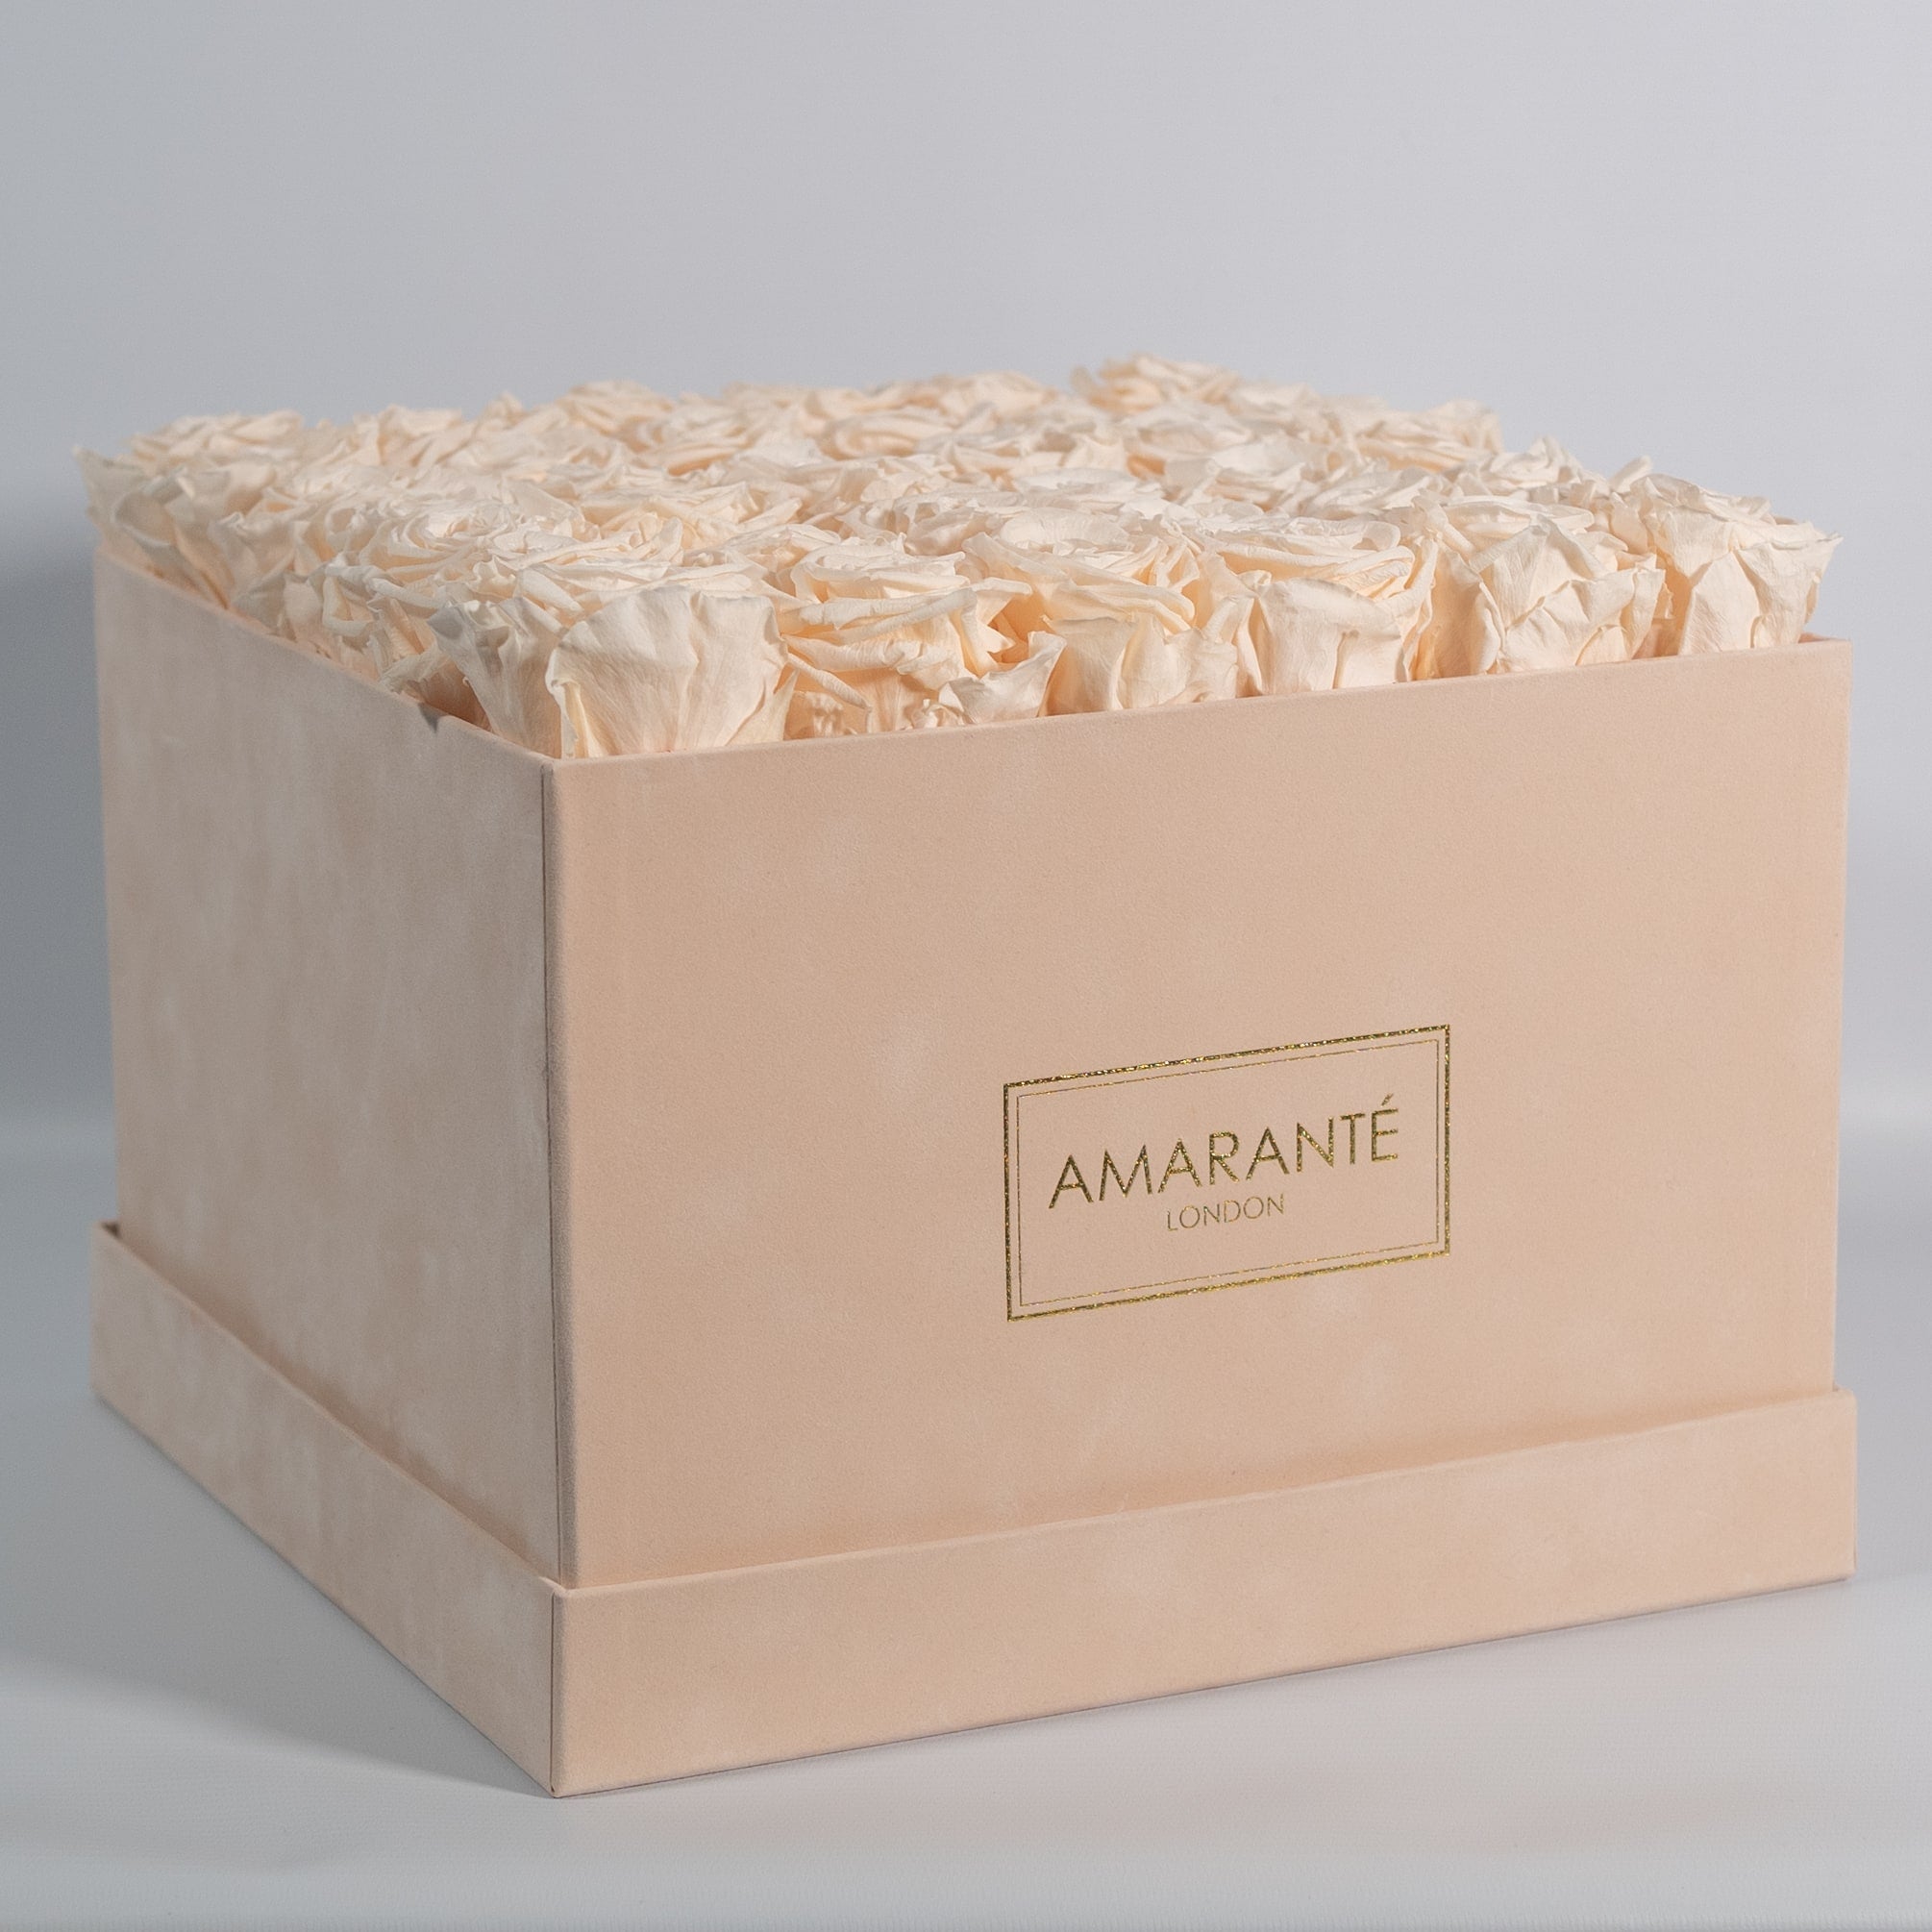 Classic champagne Roses in a magical beige box, connoting endless love.